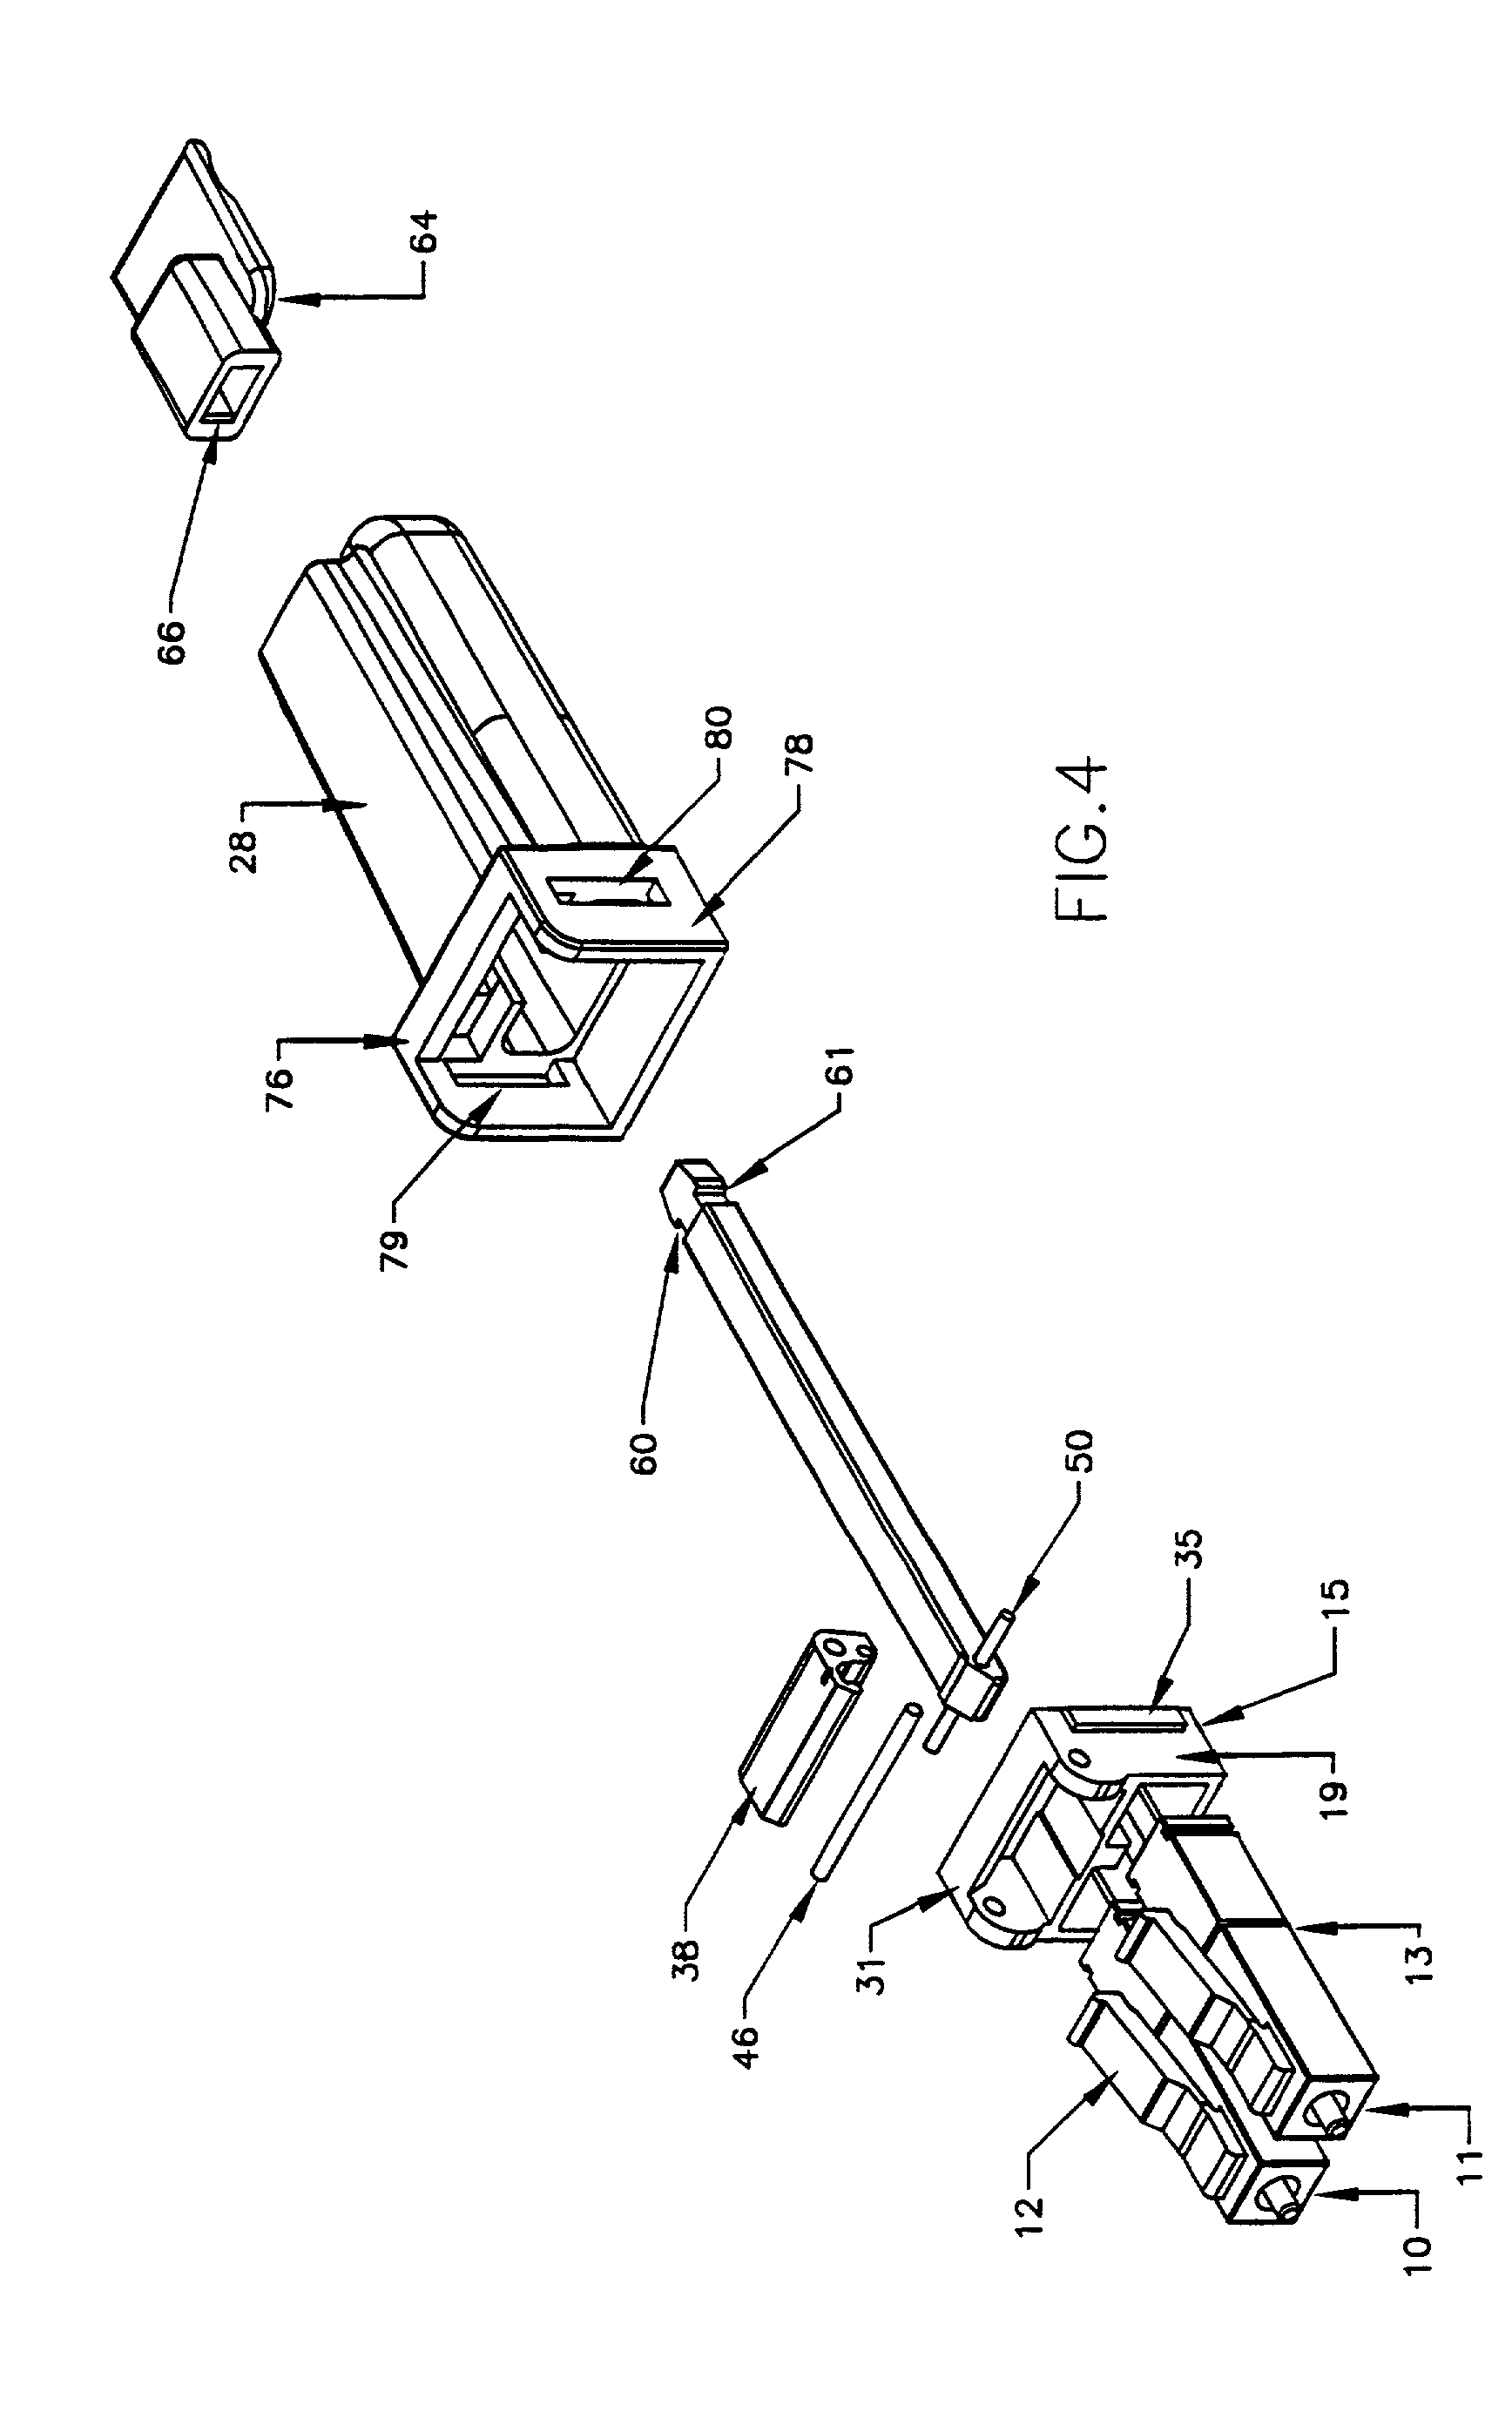 Holder for optical loopback assembly with release mechanism